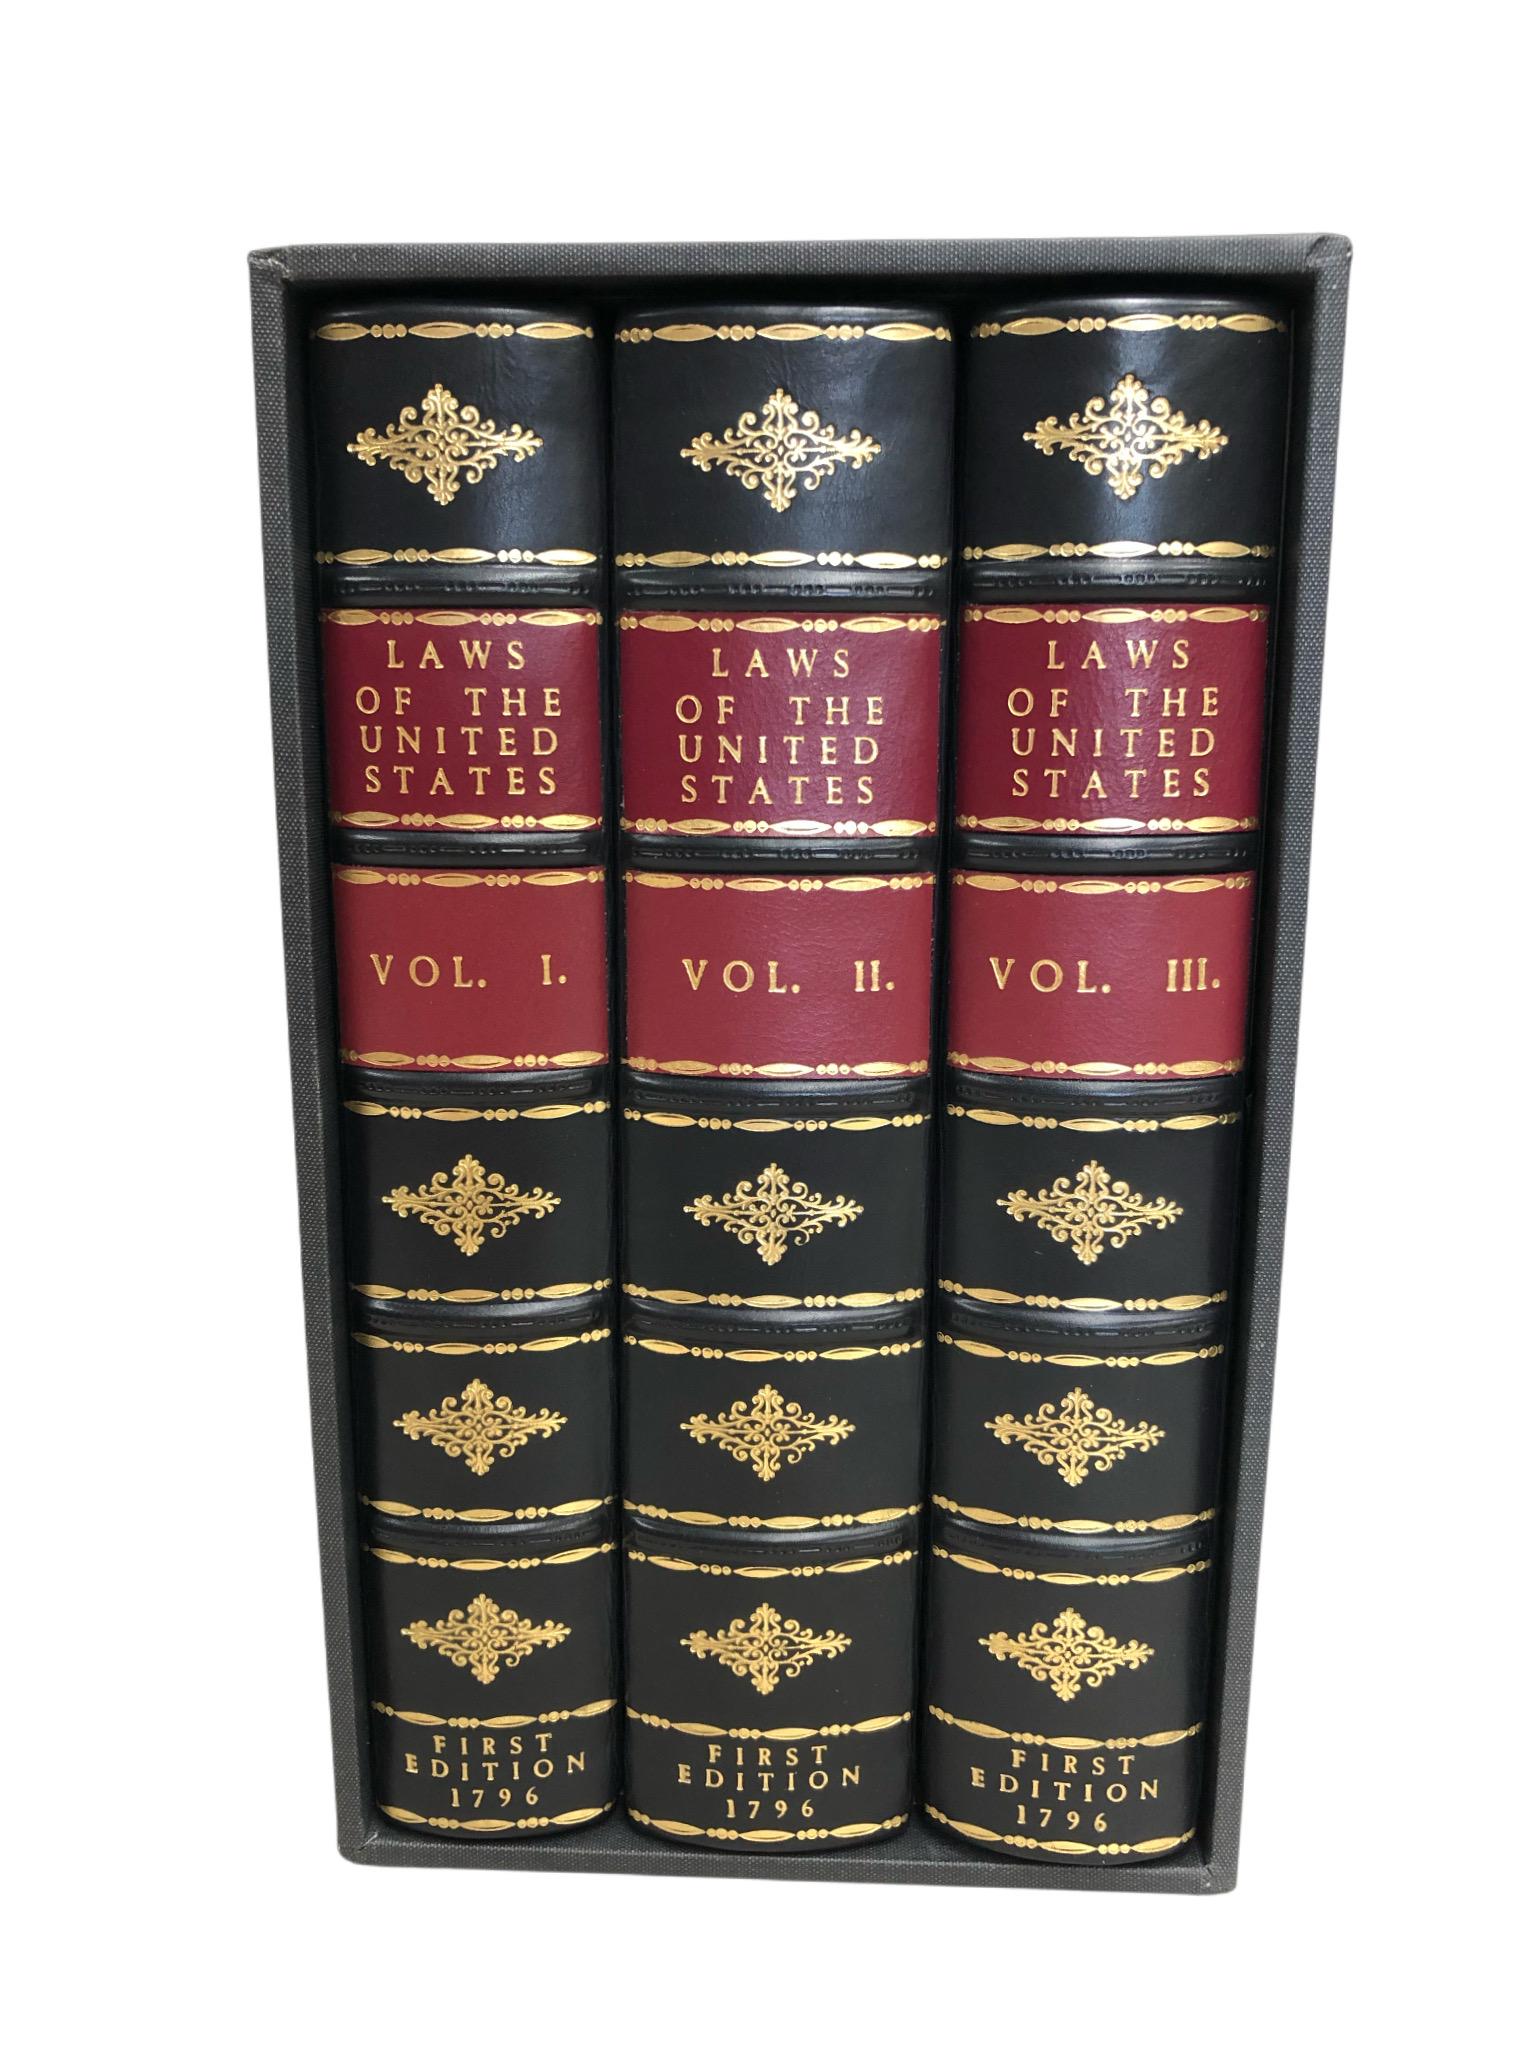 (United States Congress). The Laws of the United States of America, in three volumes published by authority. Philadelphia: Richard Folwell, 1796-[97]. Octavo. Rebound in full calf leather with blind tooling to front, back, and spine. Raised bands